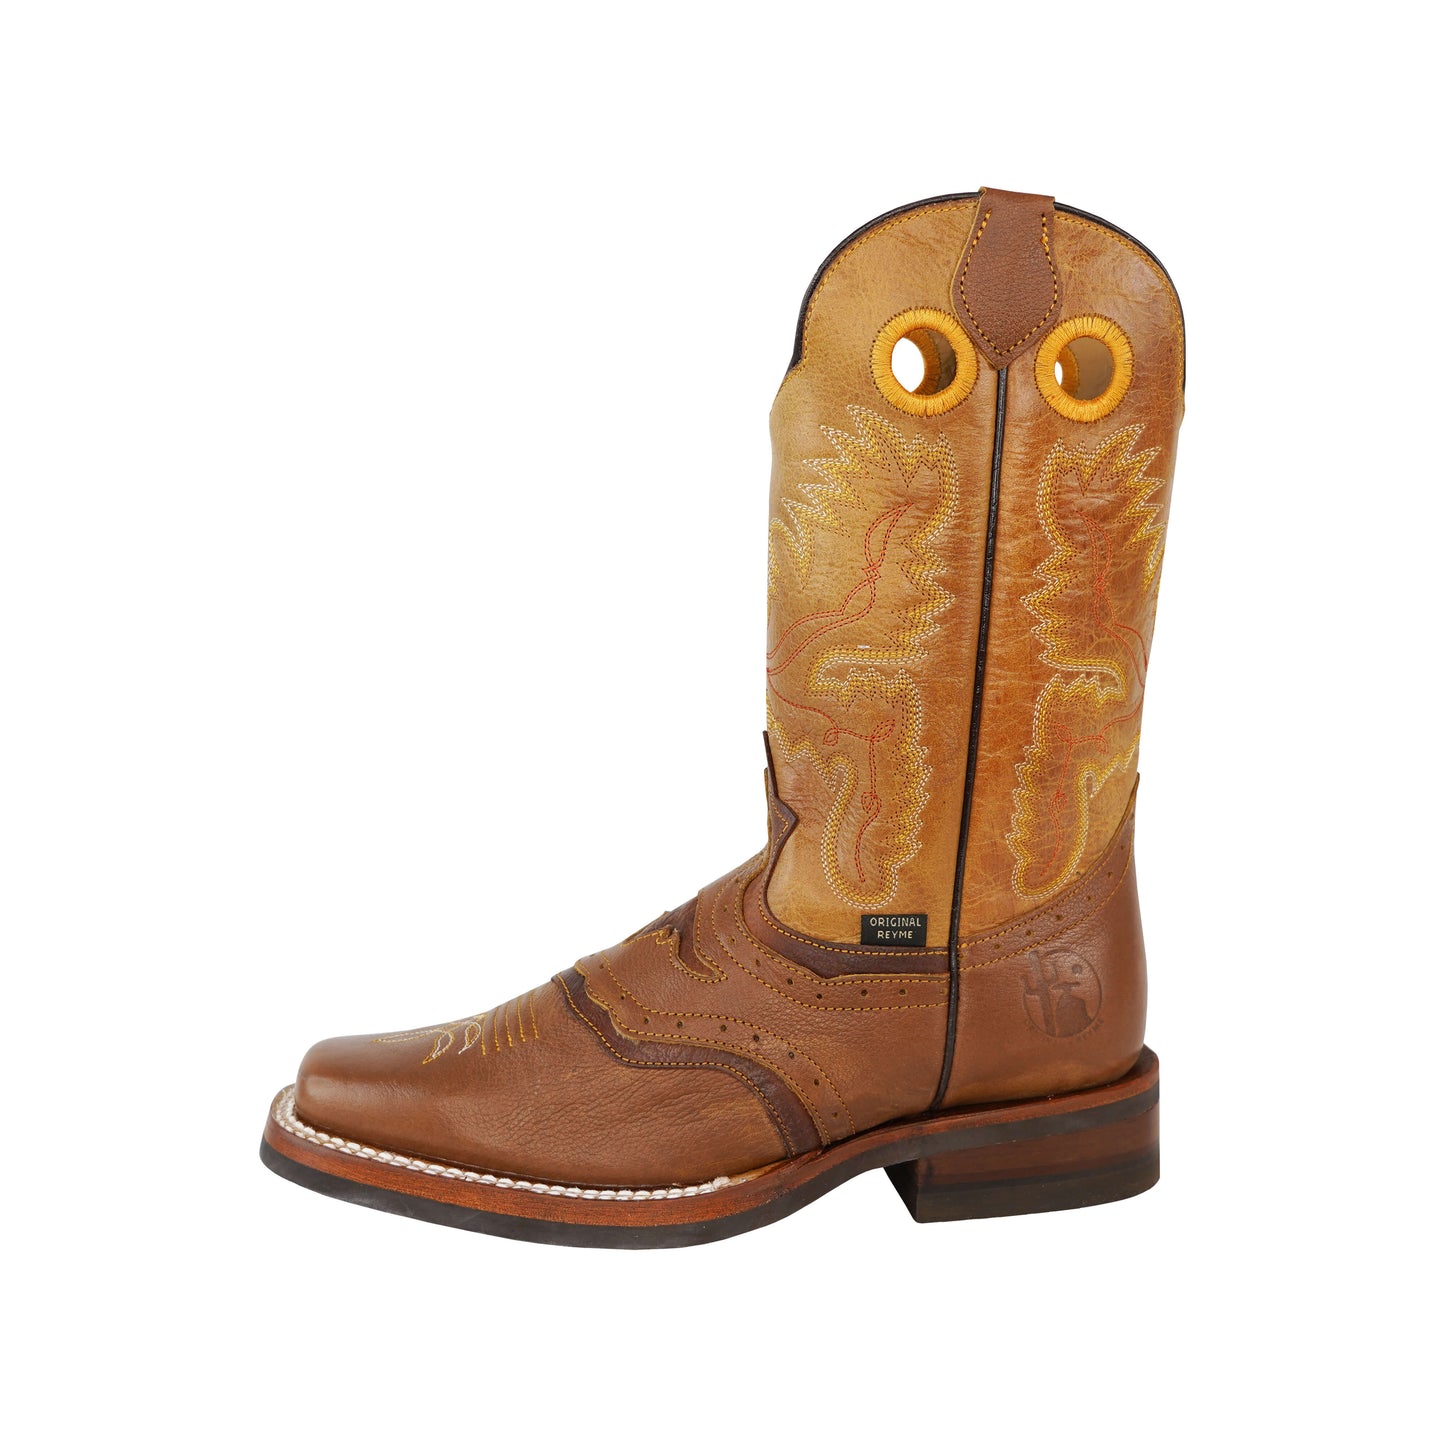 Rene Rodeo Style Boot